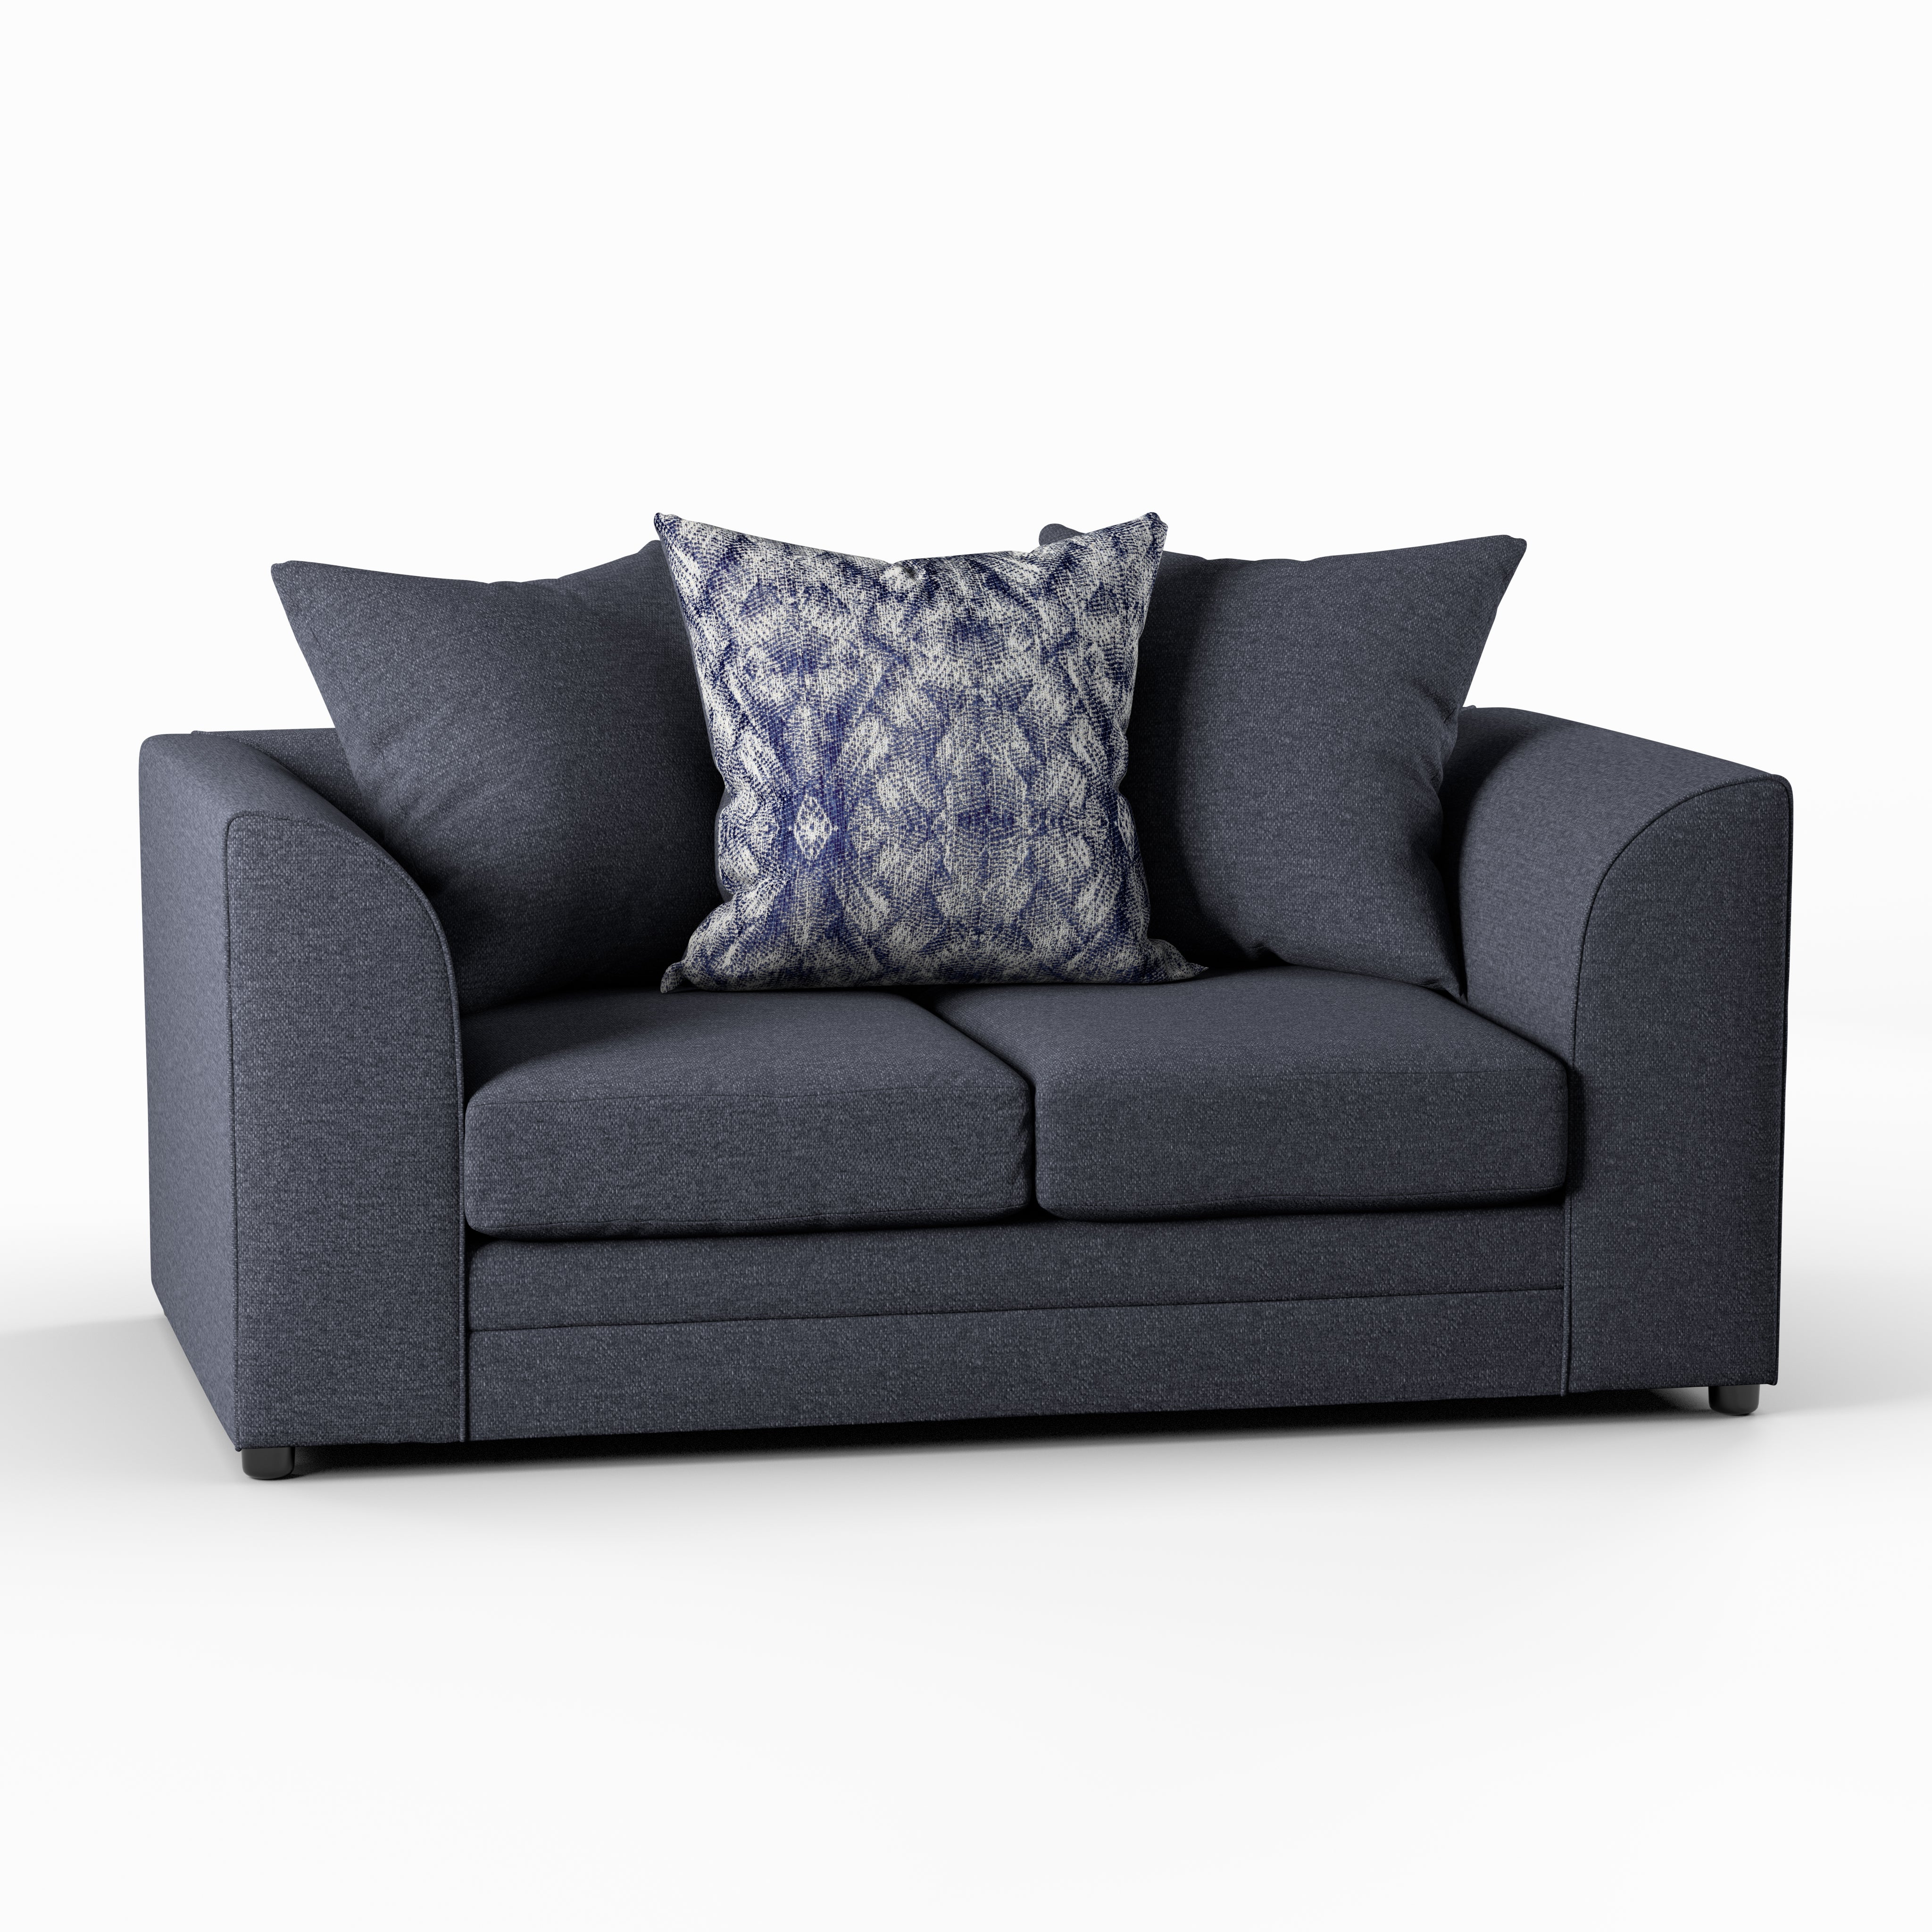 Missy Fabric Sofa Collection